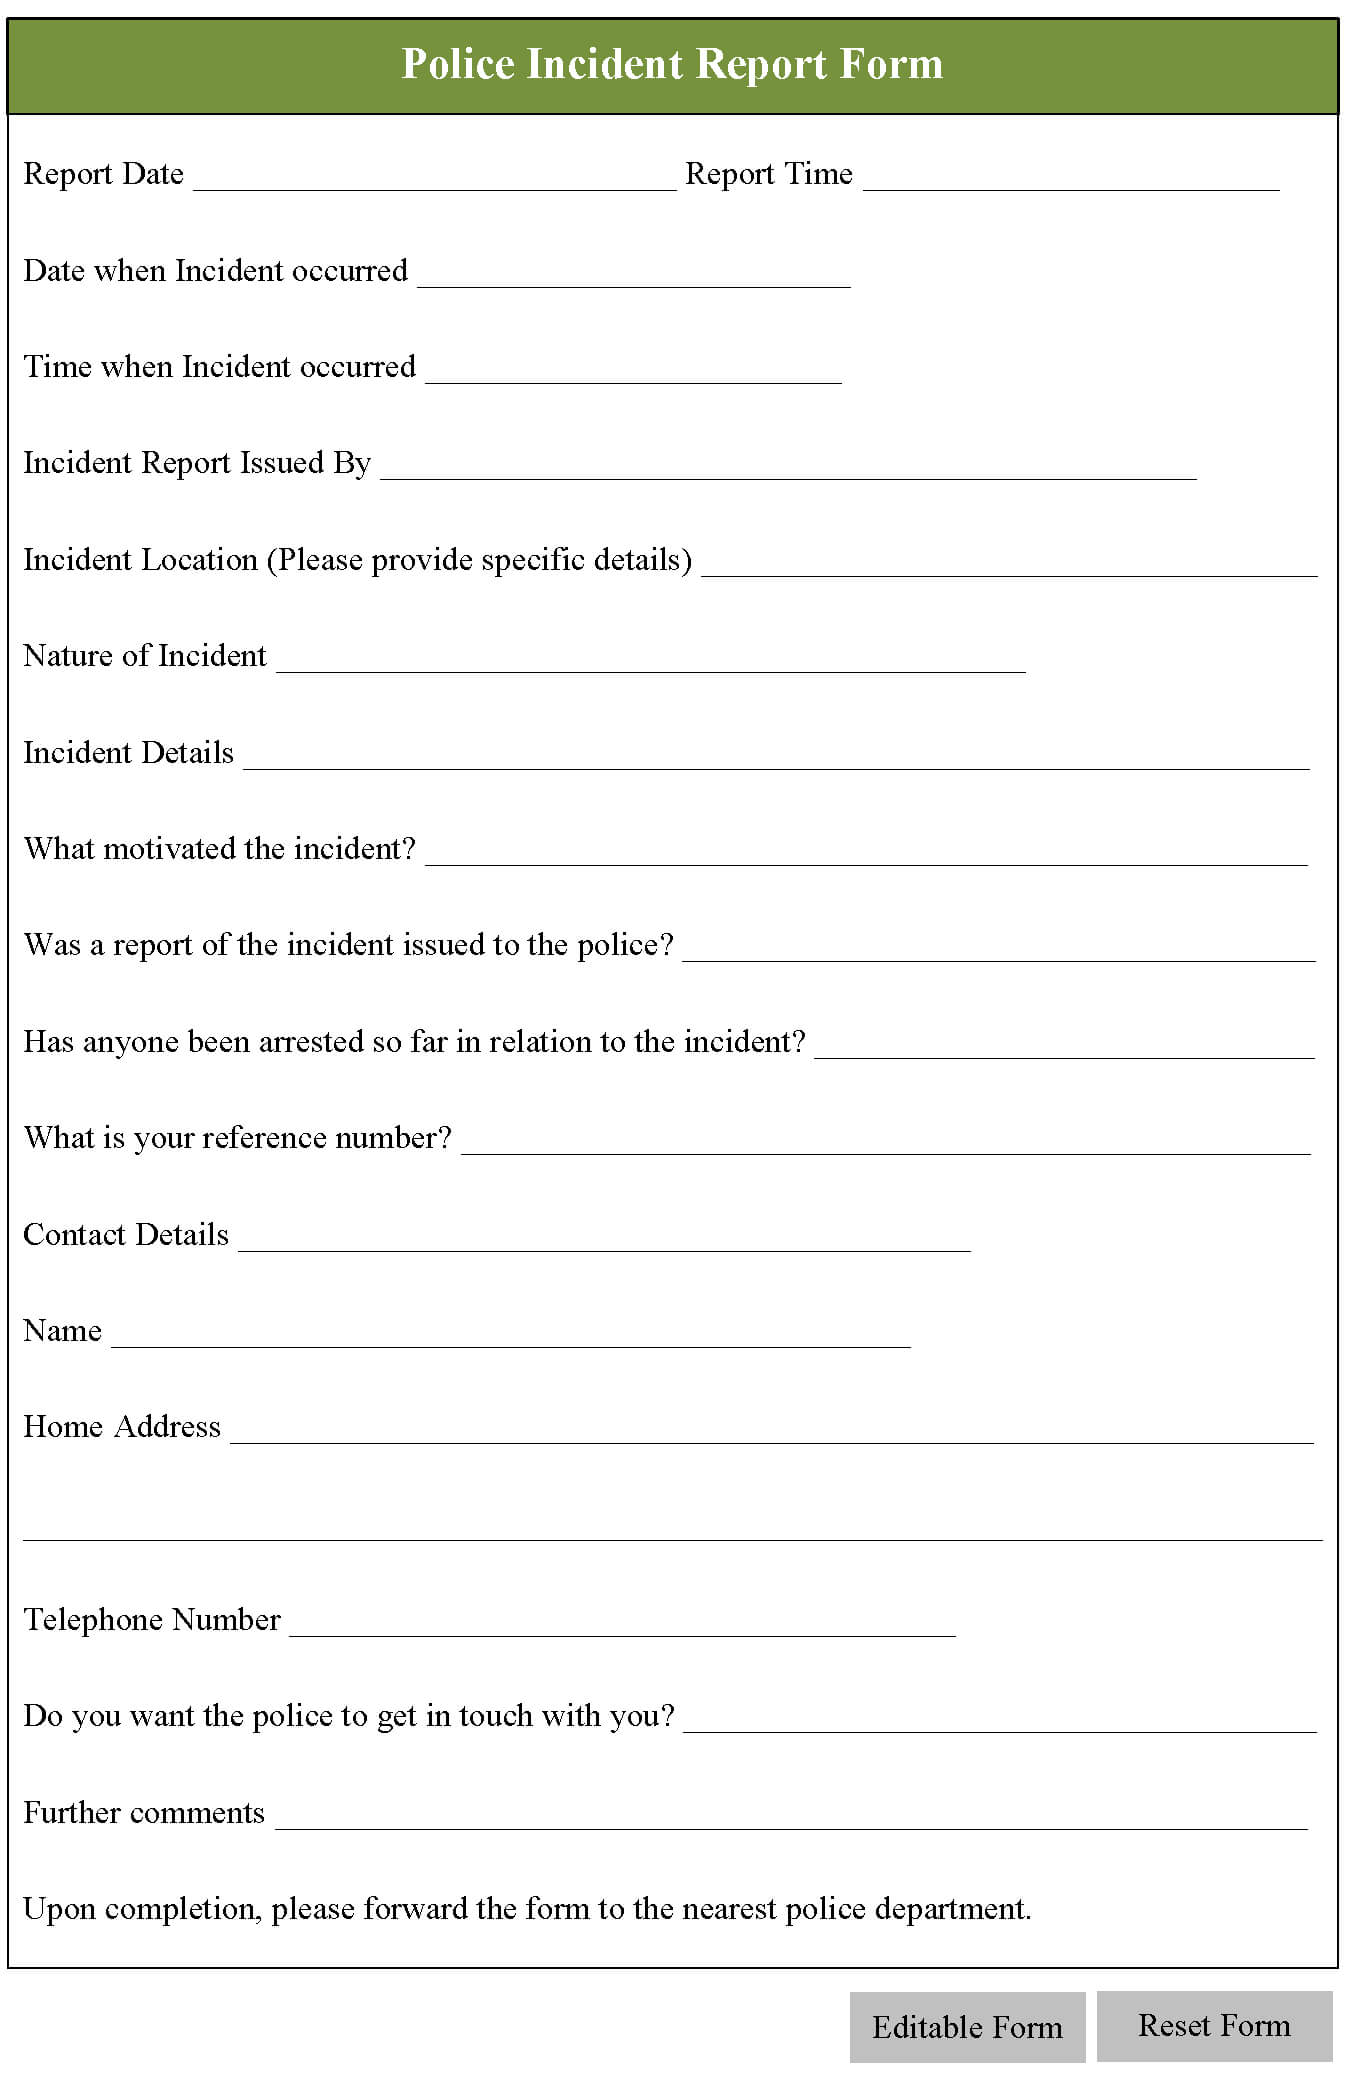 Police Incident Report Form | Editable Forms For Police Incident Report Template